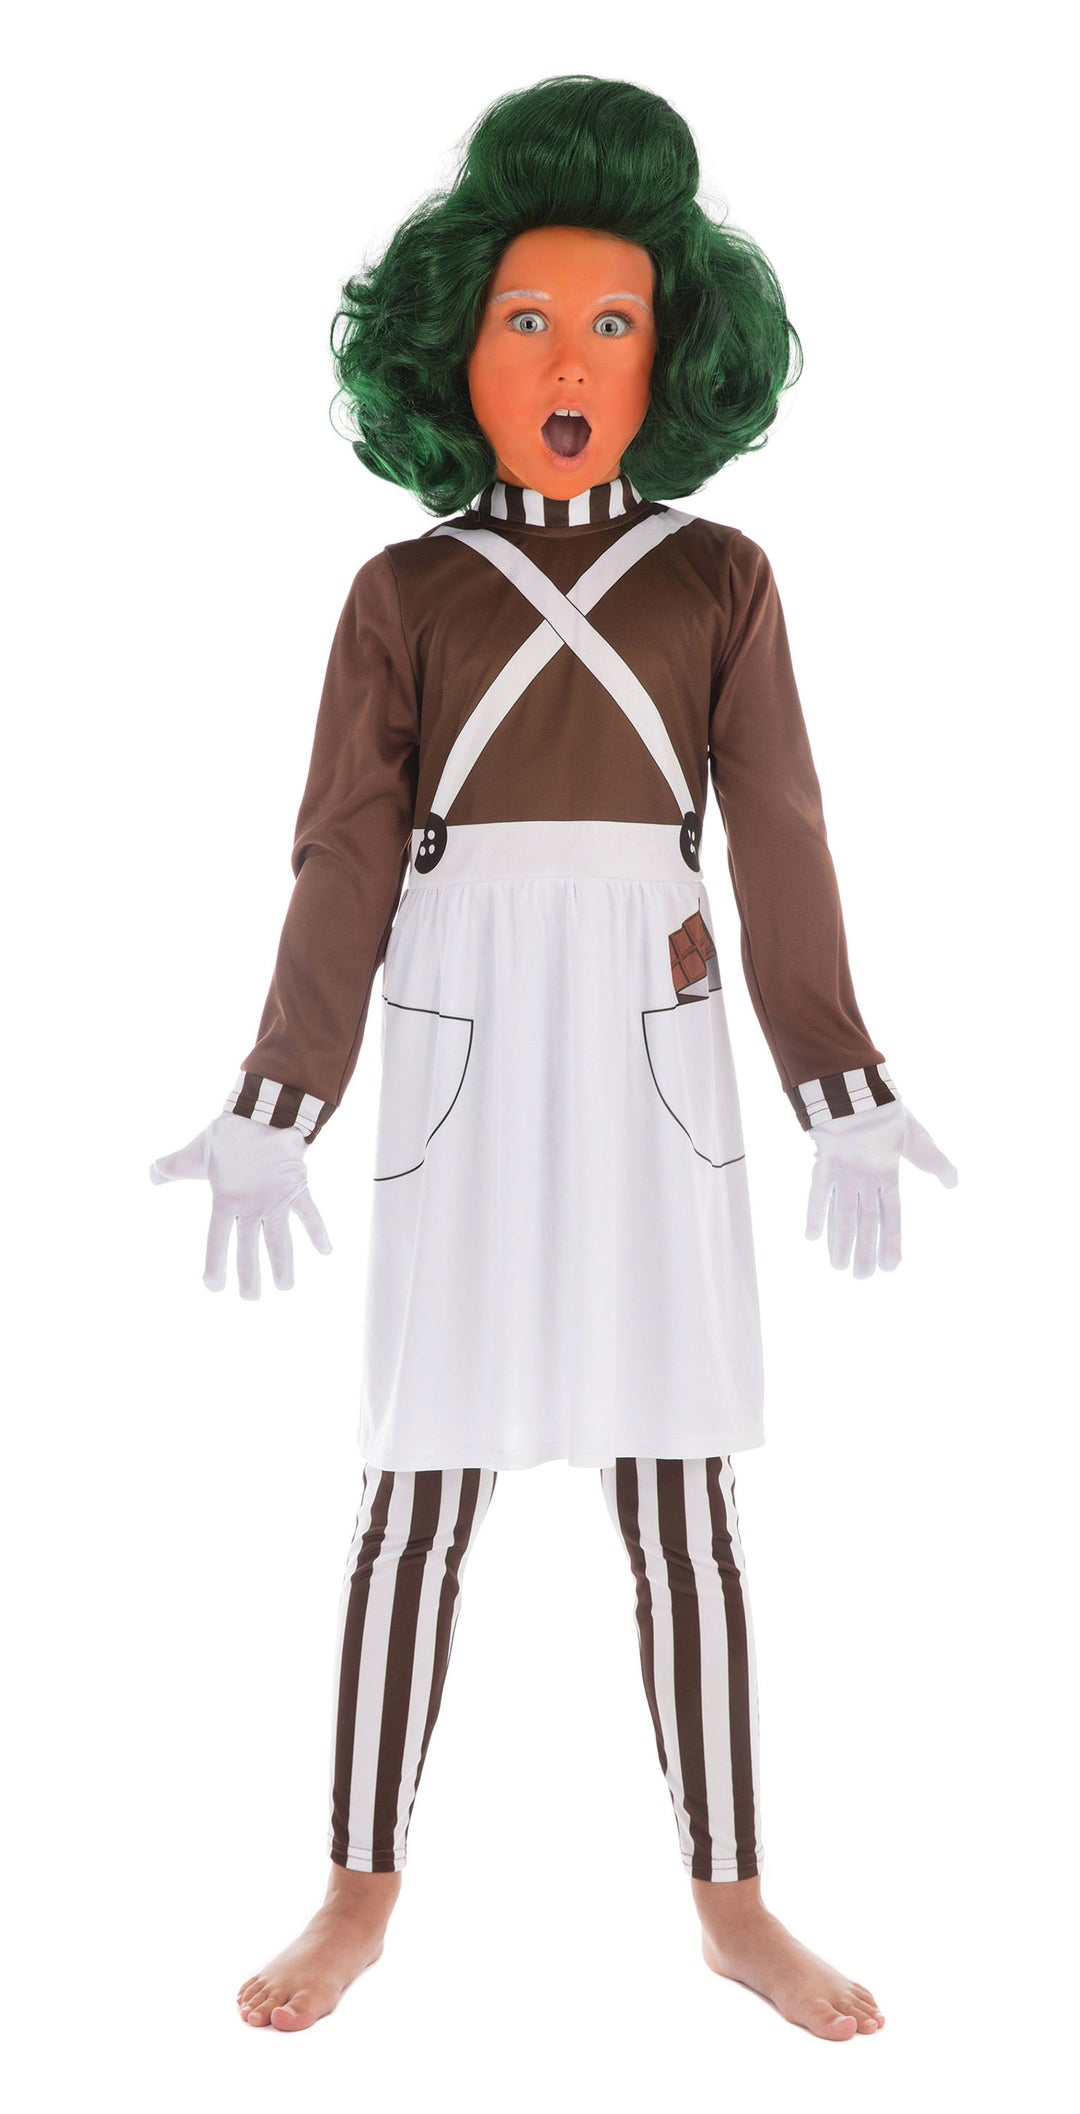 Chocolate Factory Worker Kids Themed Costume